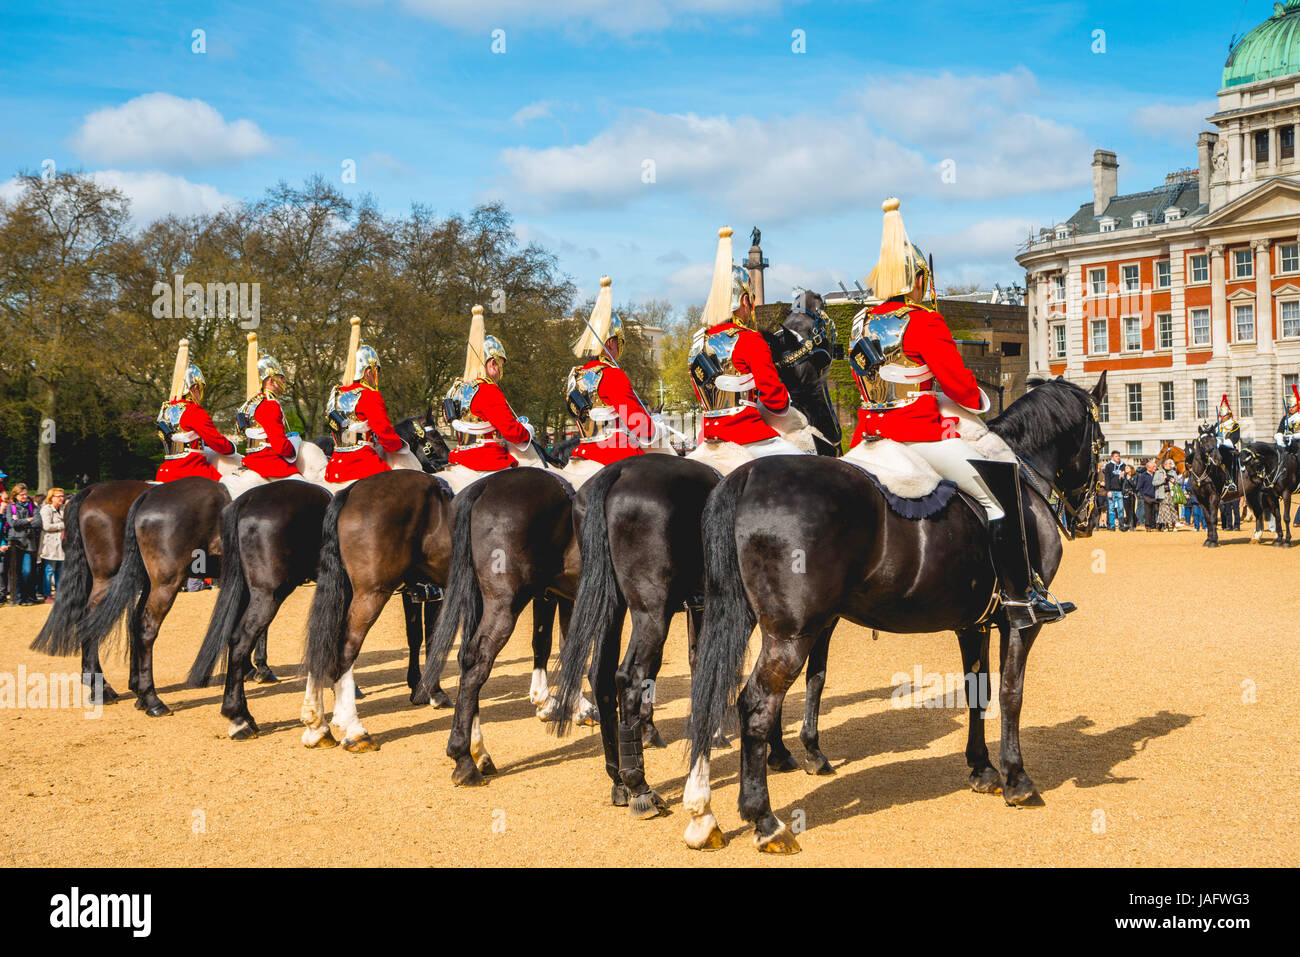 The Royal Guards in red uniform on horses, The Life Guards, Household Cavalry Mounted Regiment, parade ground Horse Guards Stock Photo